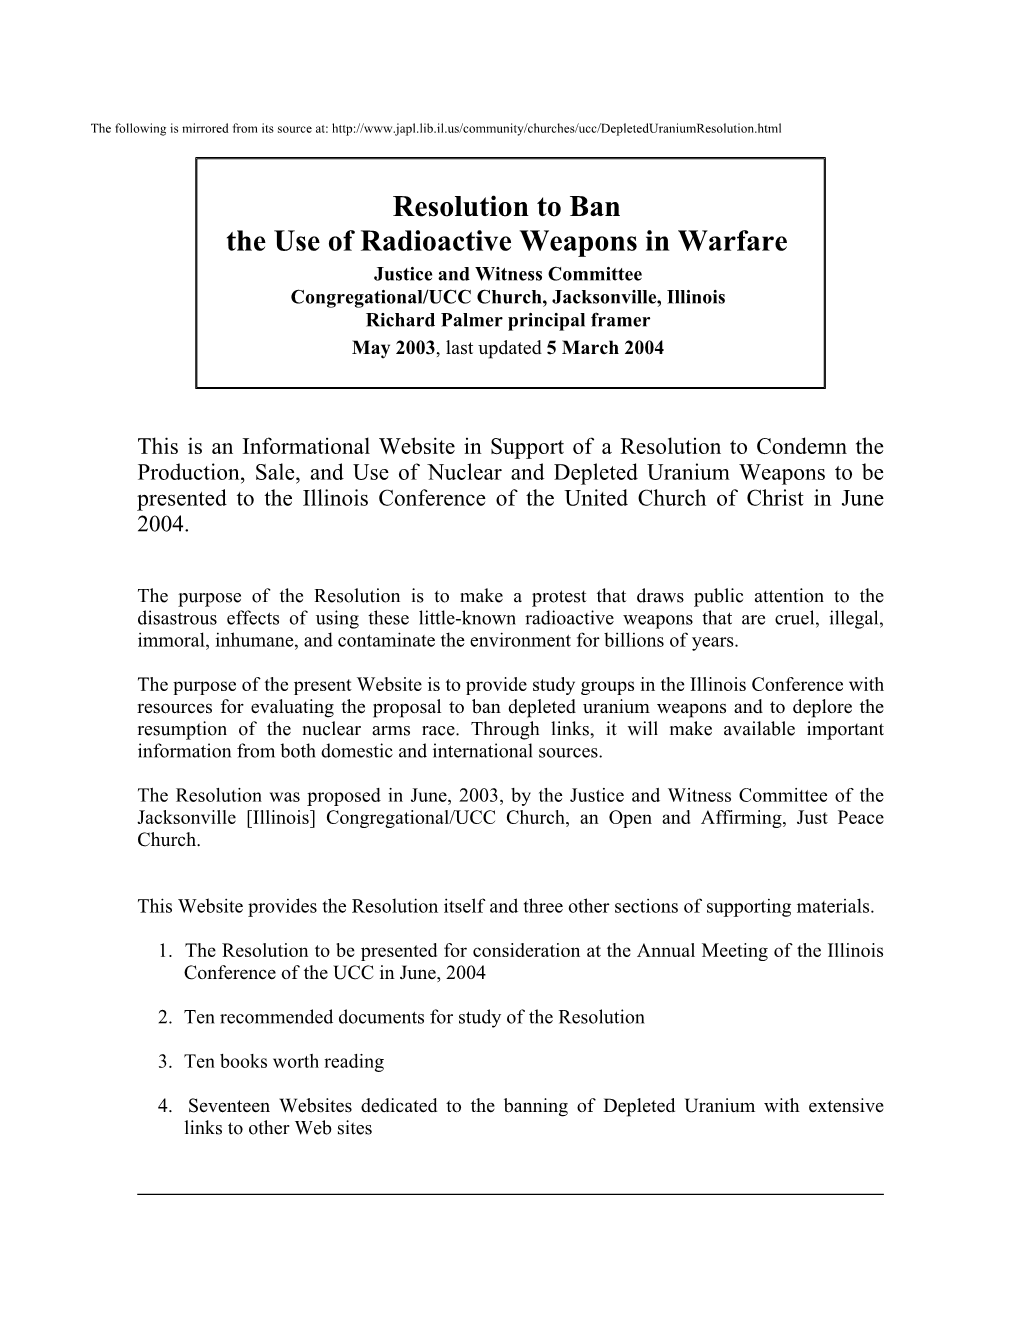 Resolution to Ban the Use of Radioactive Weapons in Warfare